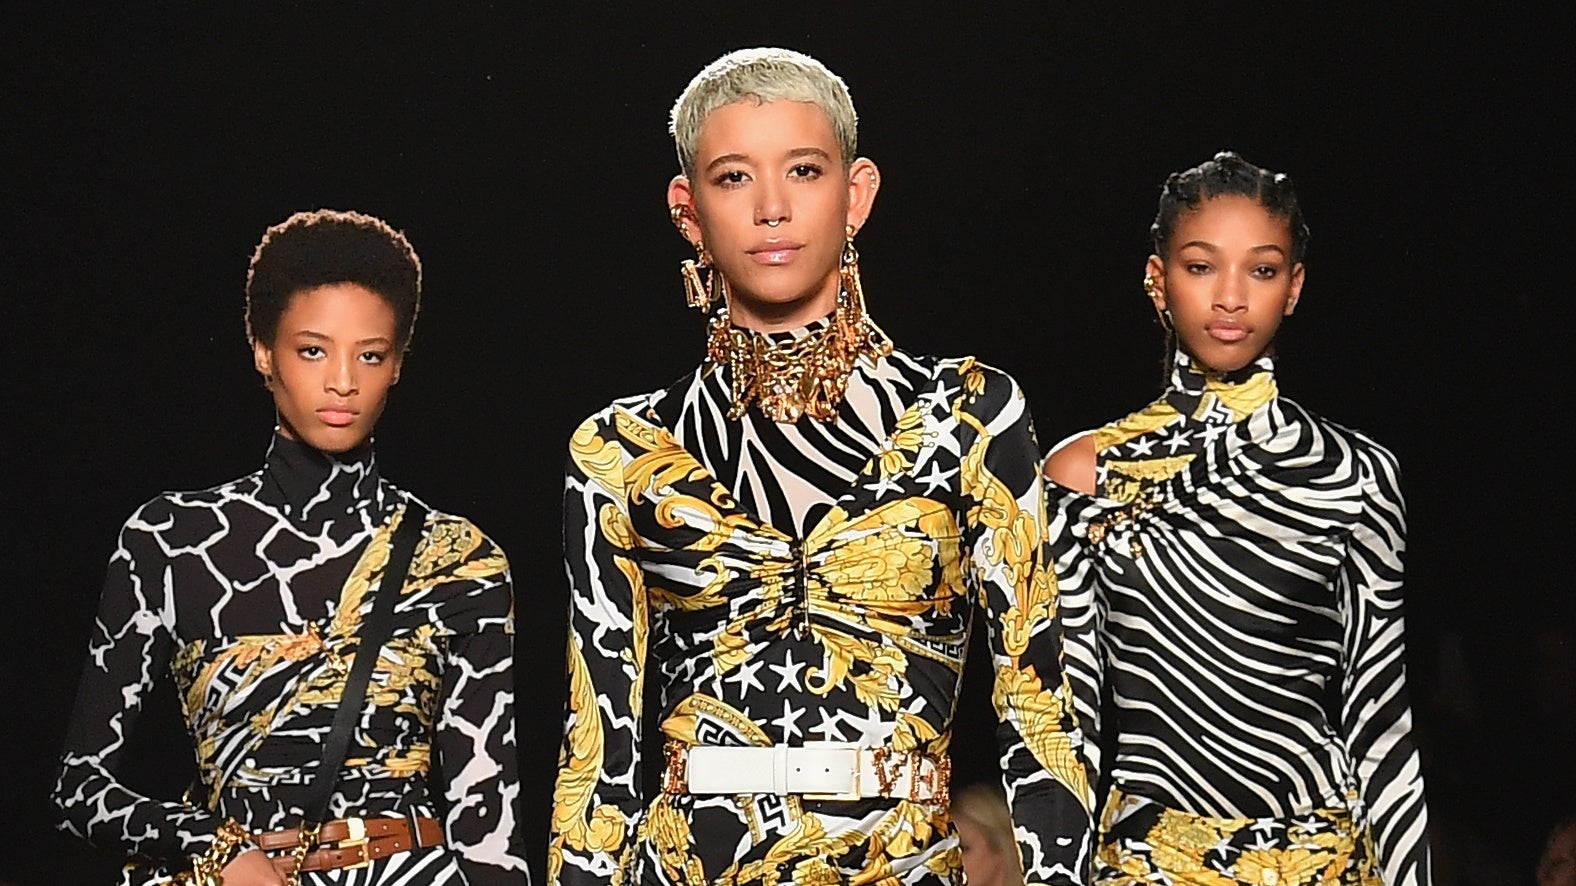 Fashion brands: going wild with the zebra print trend this season